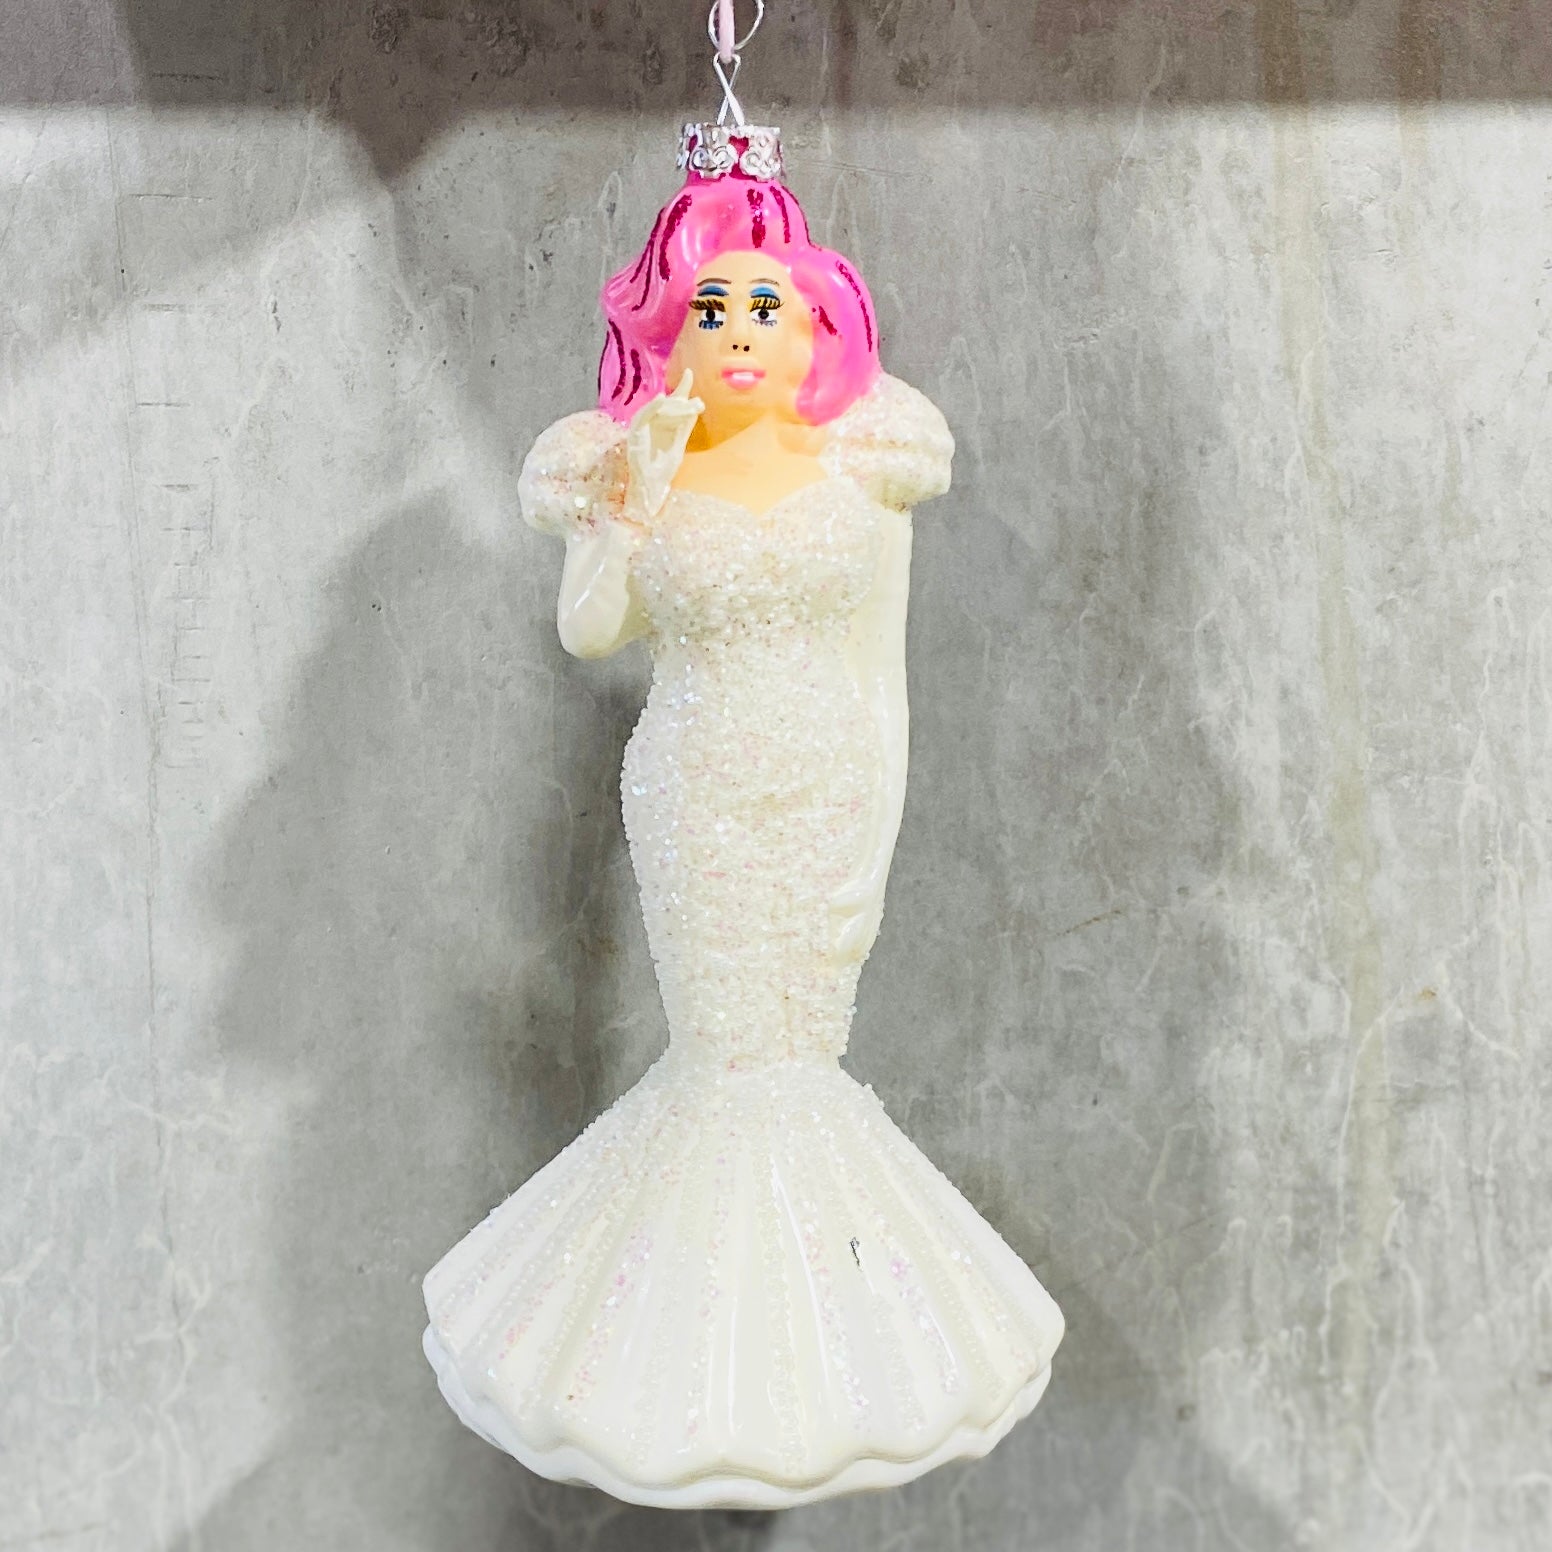 Resin holiday Drag Queen ornament - available at scouthouse.com.au